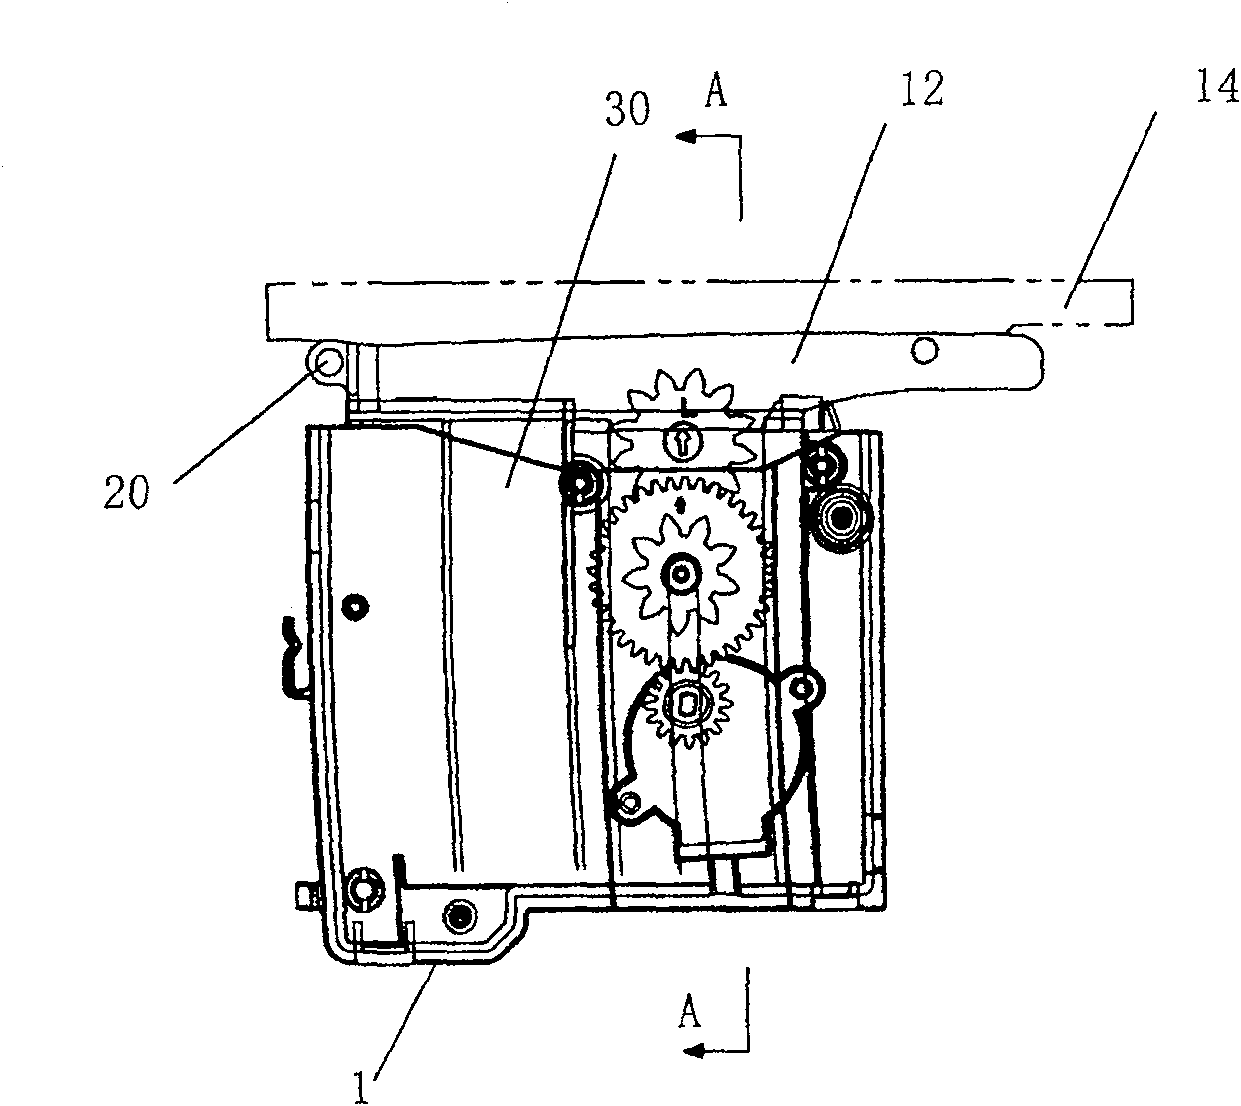 Folding driving mechanism for air conditioner air intake grid